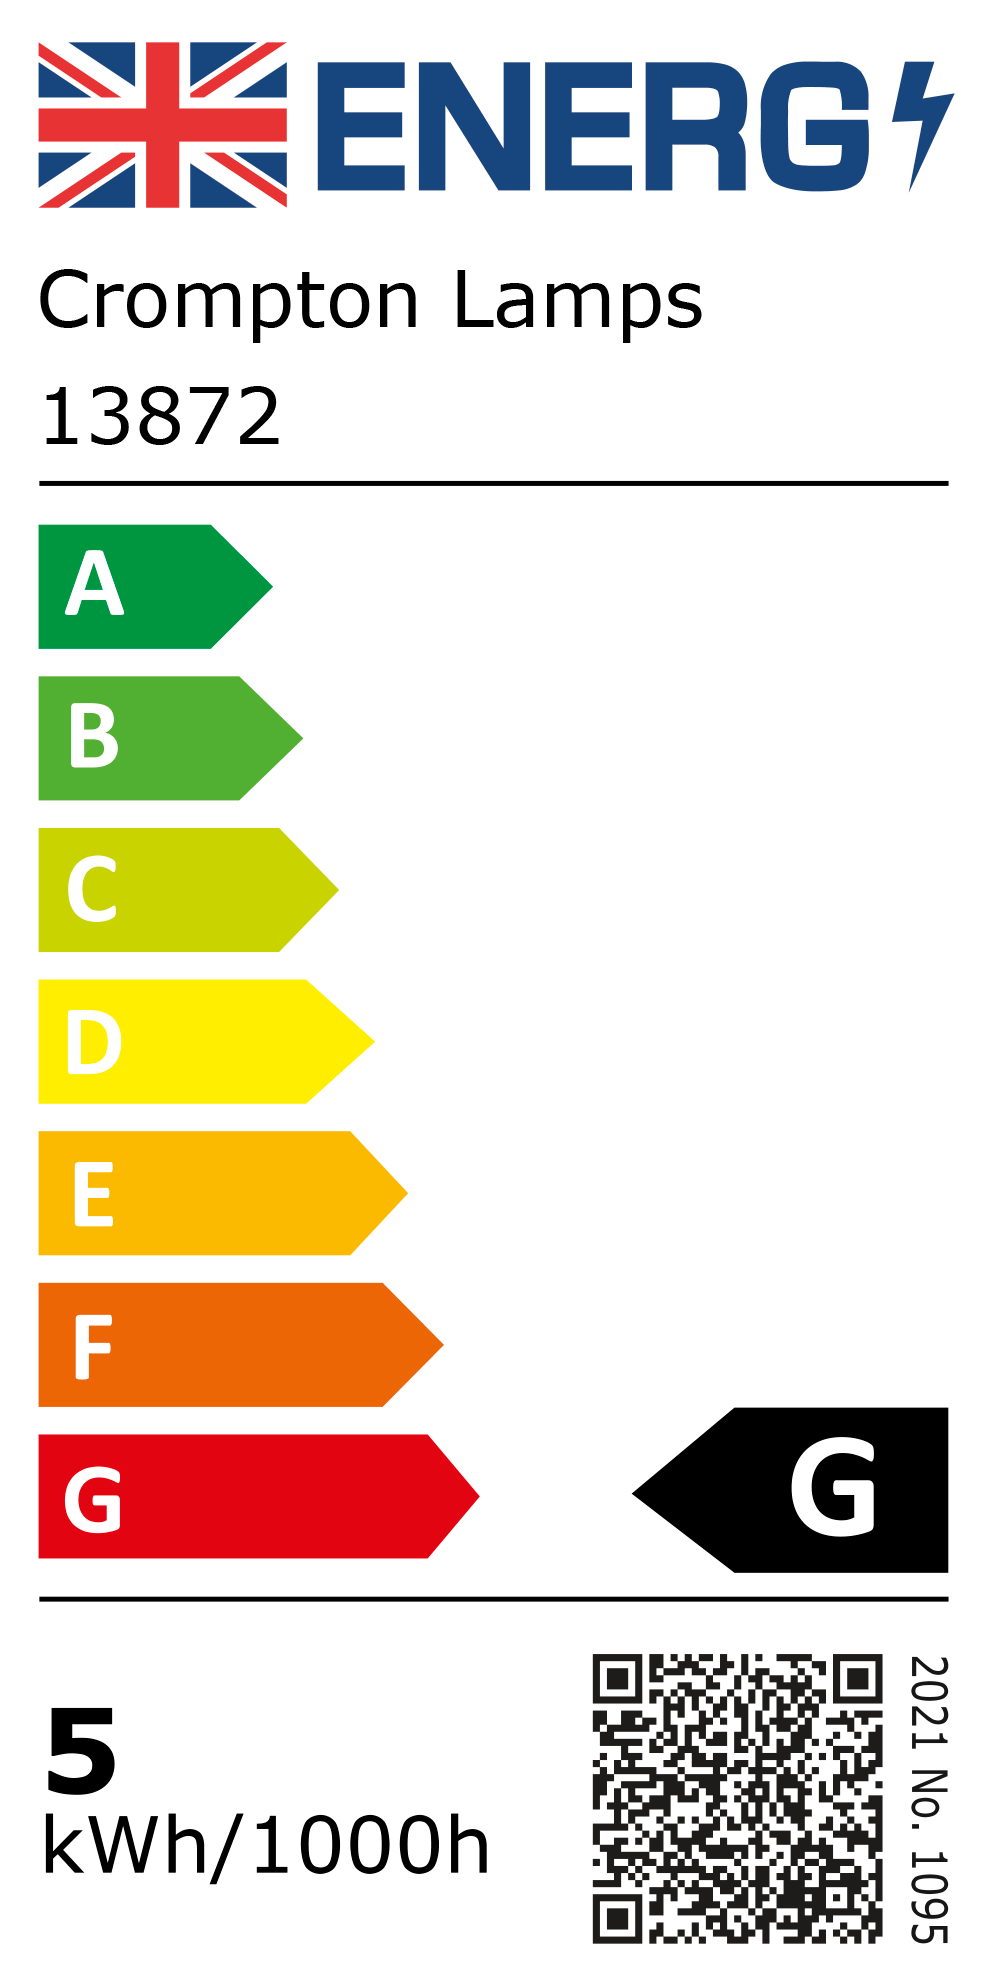 New 2021 Energy Rating Label: Stock Code 13872